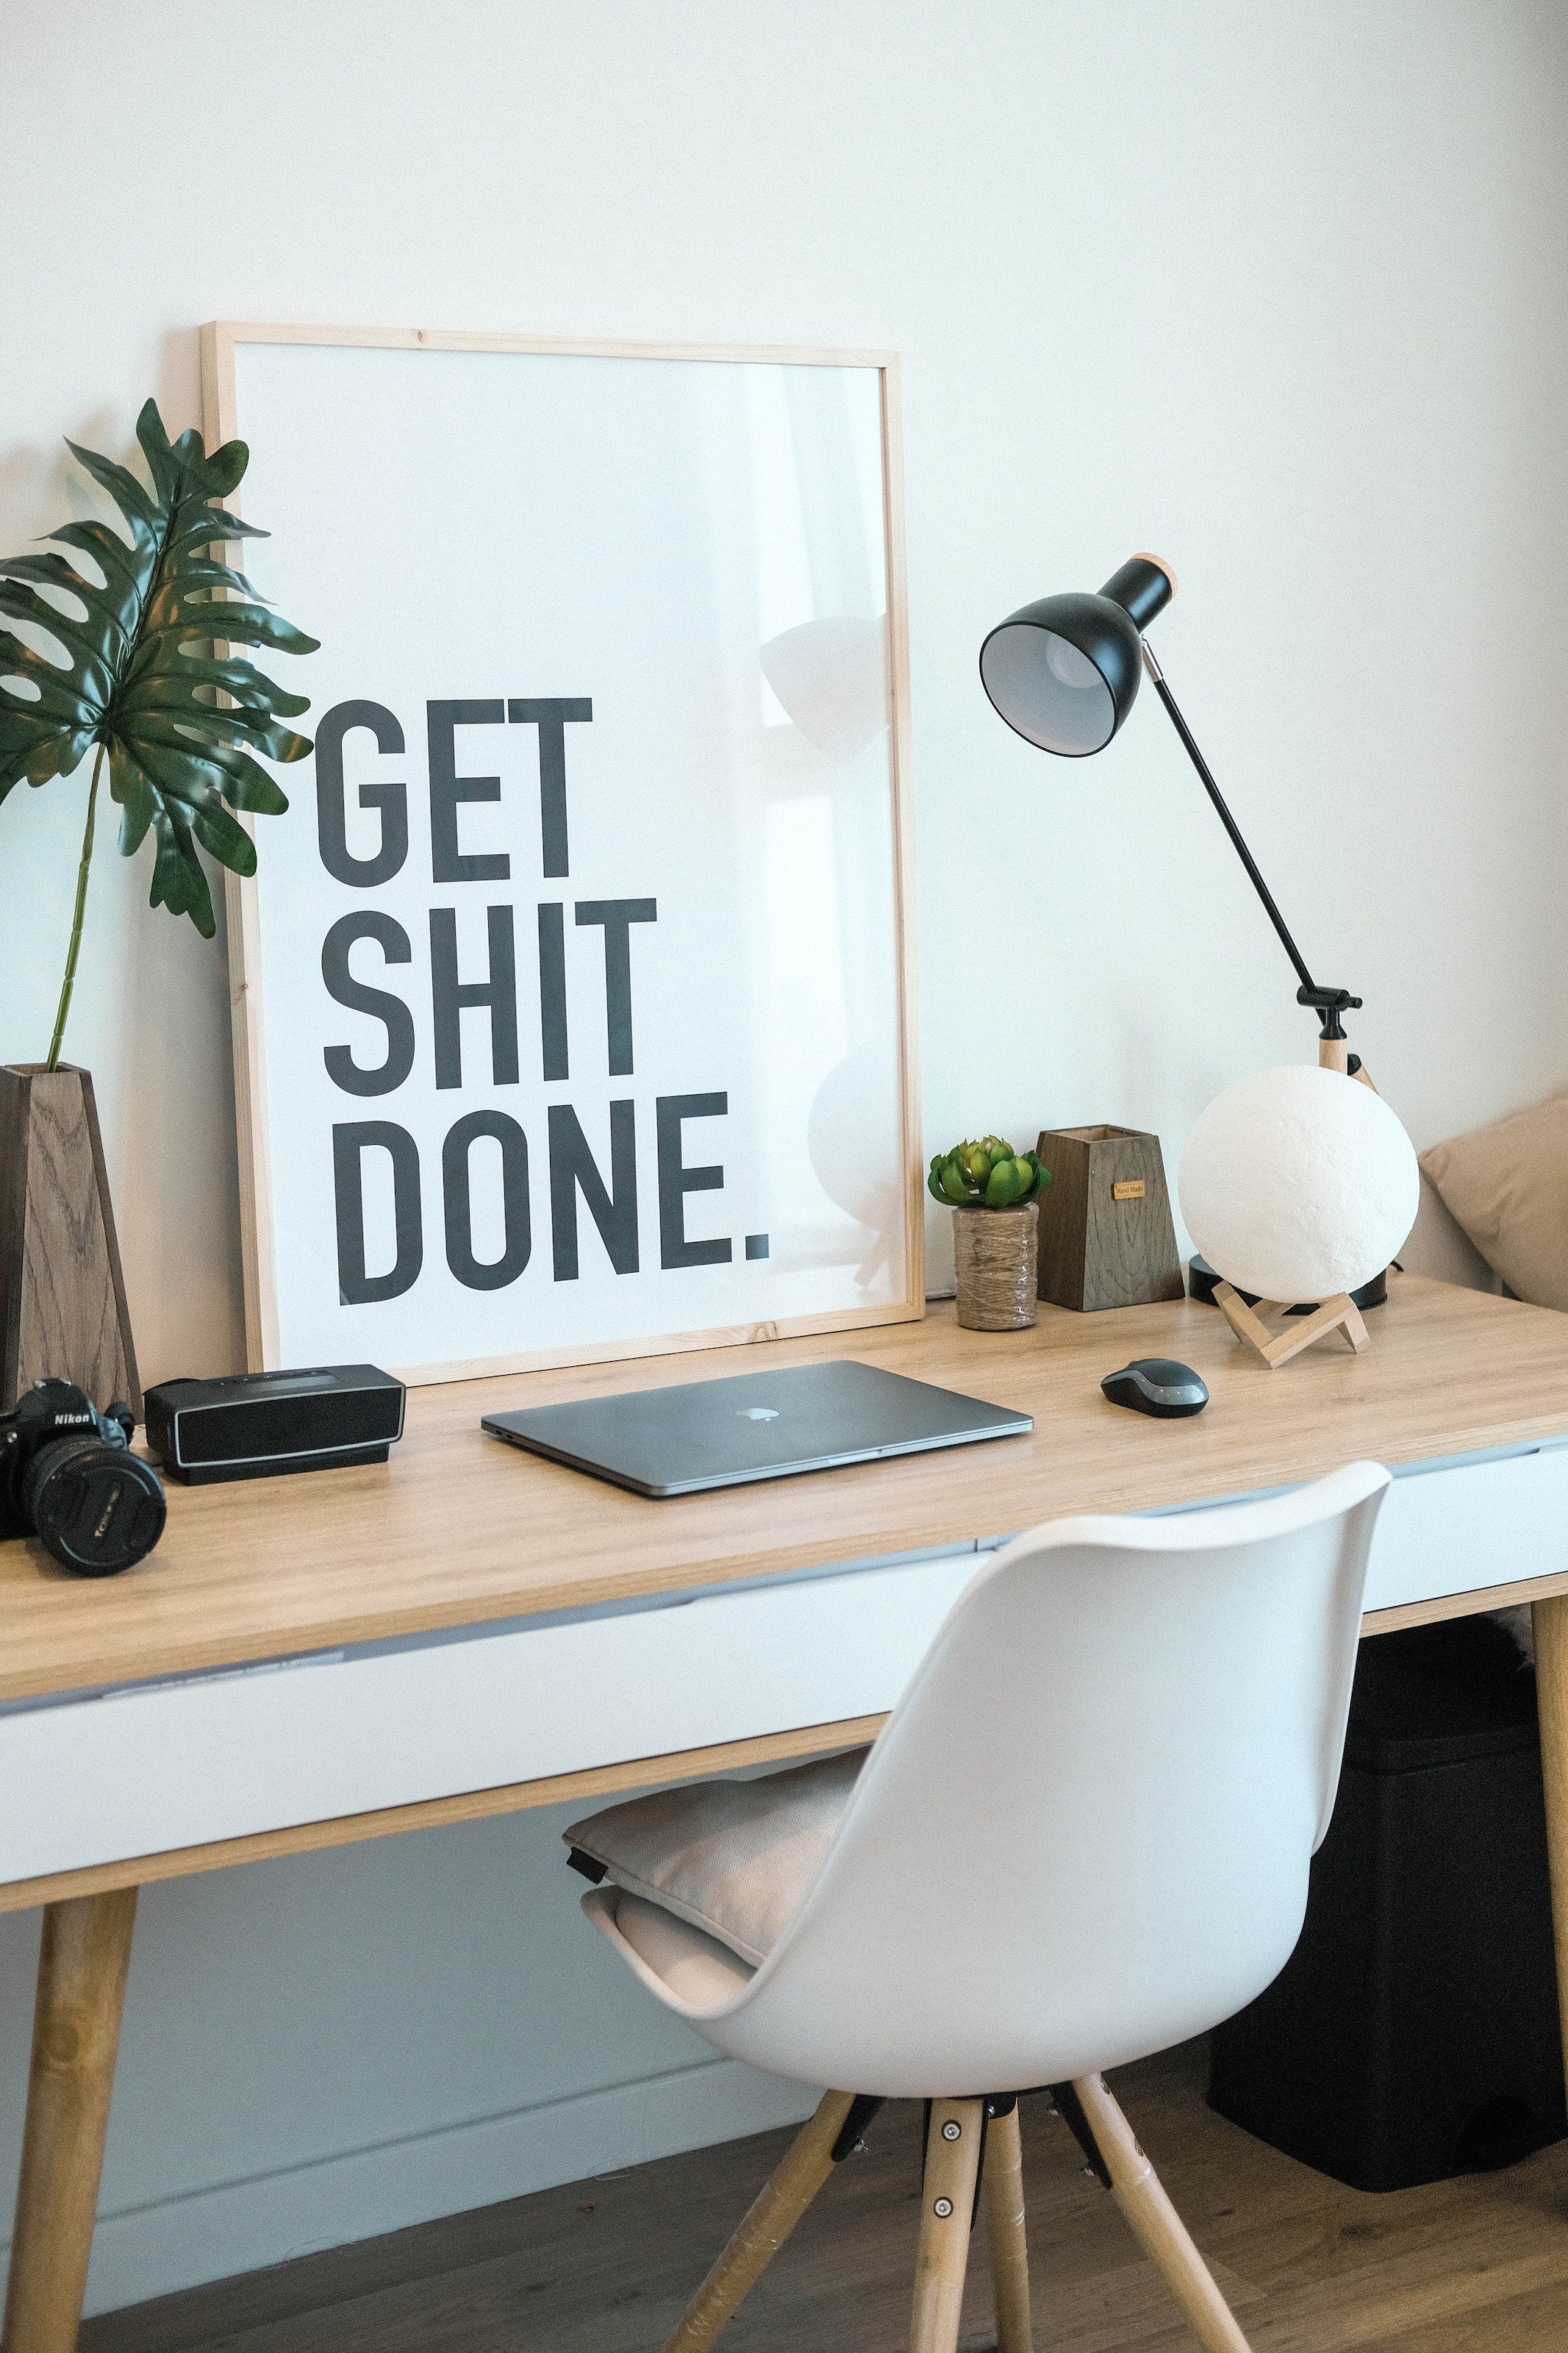 24+ Must-Have Minimalist Desk Accessories and Home Office Setup Essentials